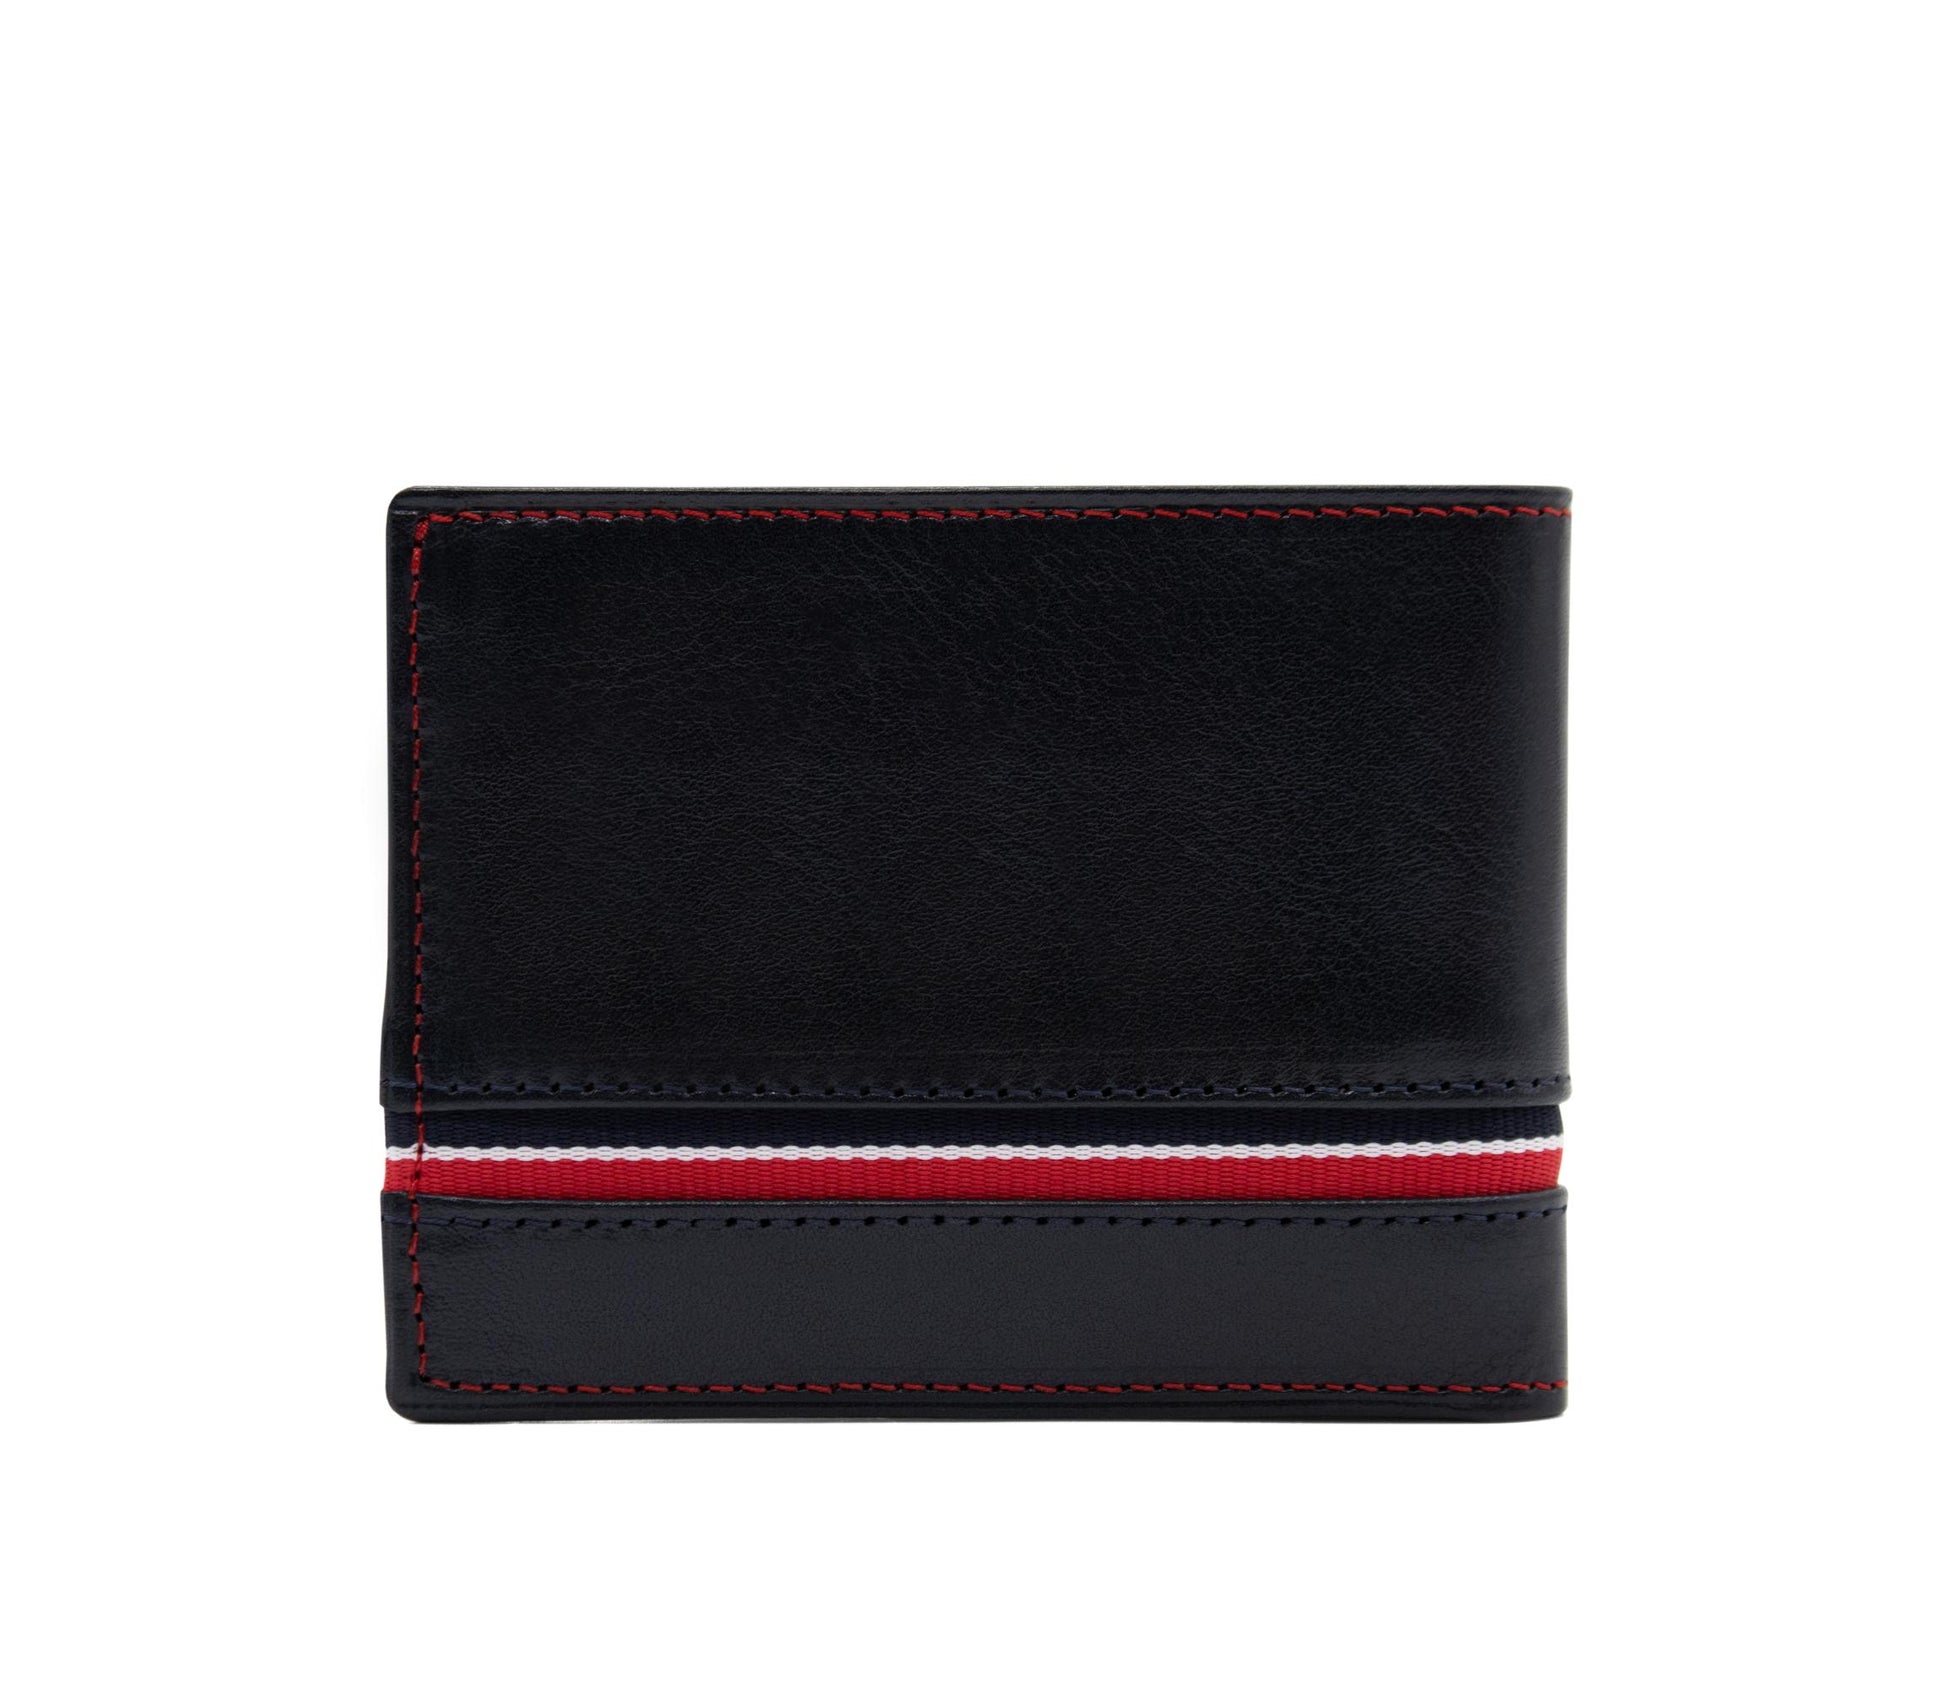 #color_ Navy | Cavalinho The Sailor Trifold Leather Wallet - Navy - 28150523.22_3